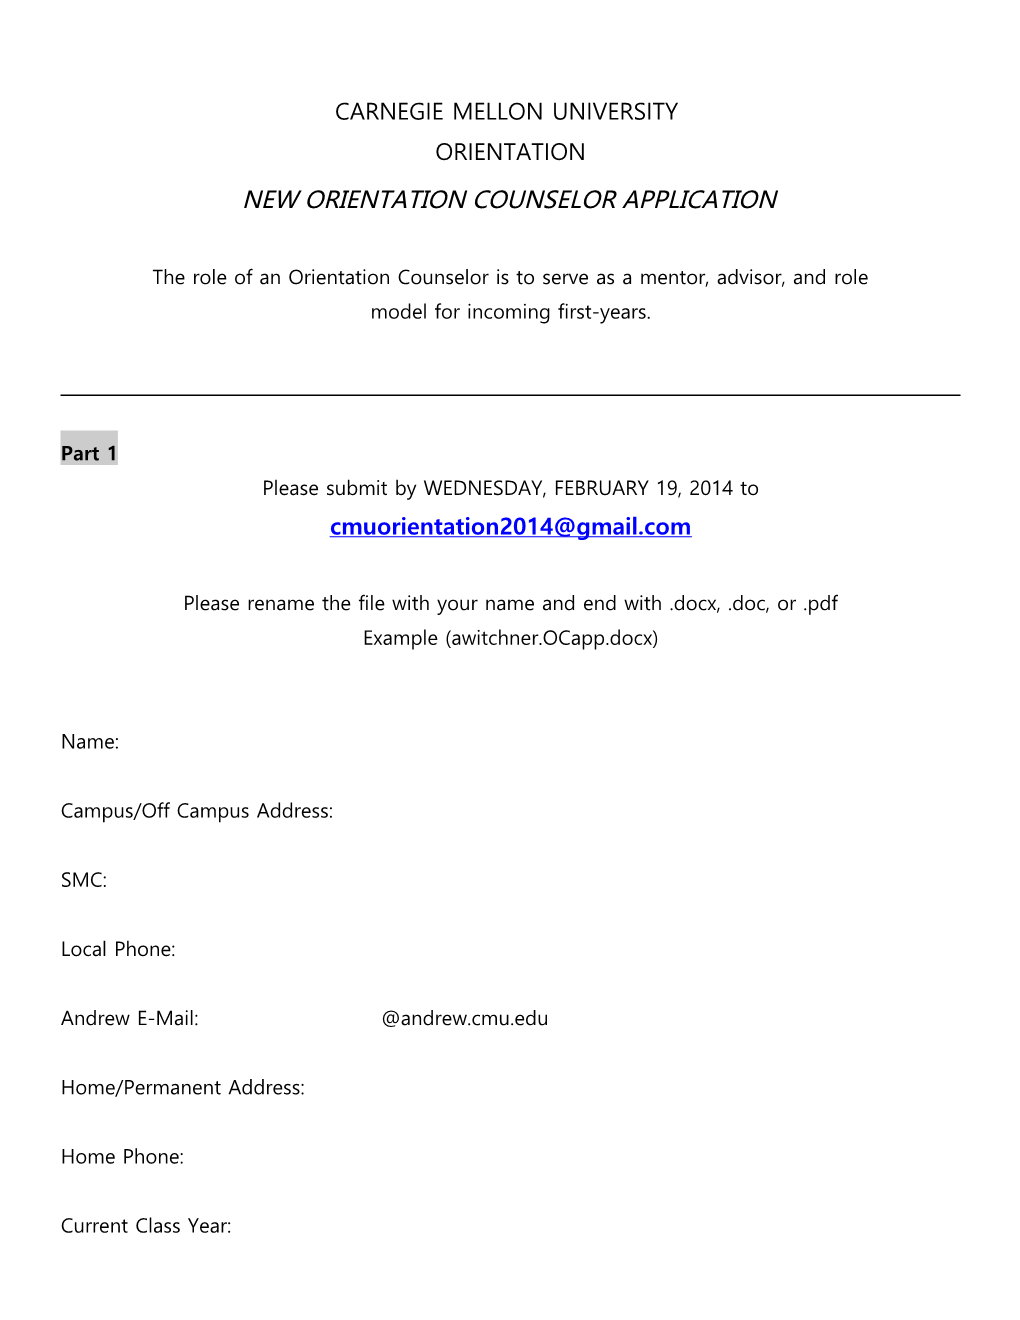 New Orientation Counselor Application